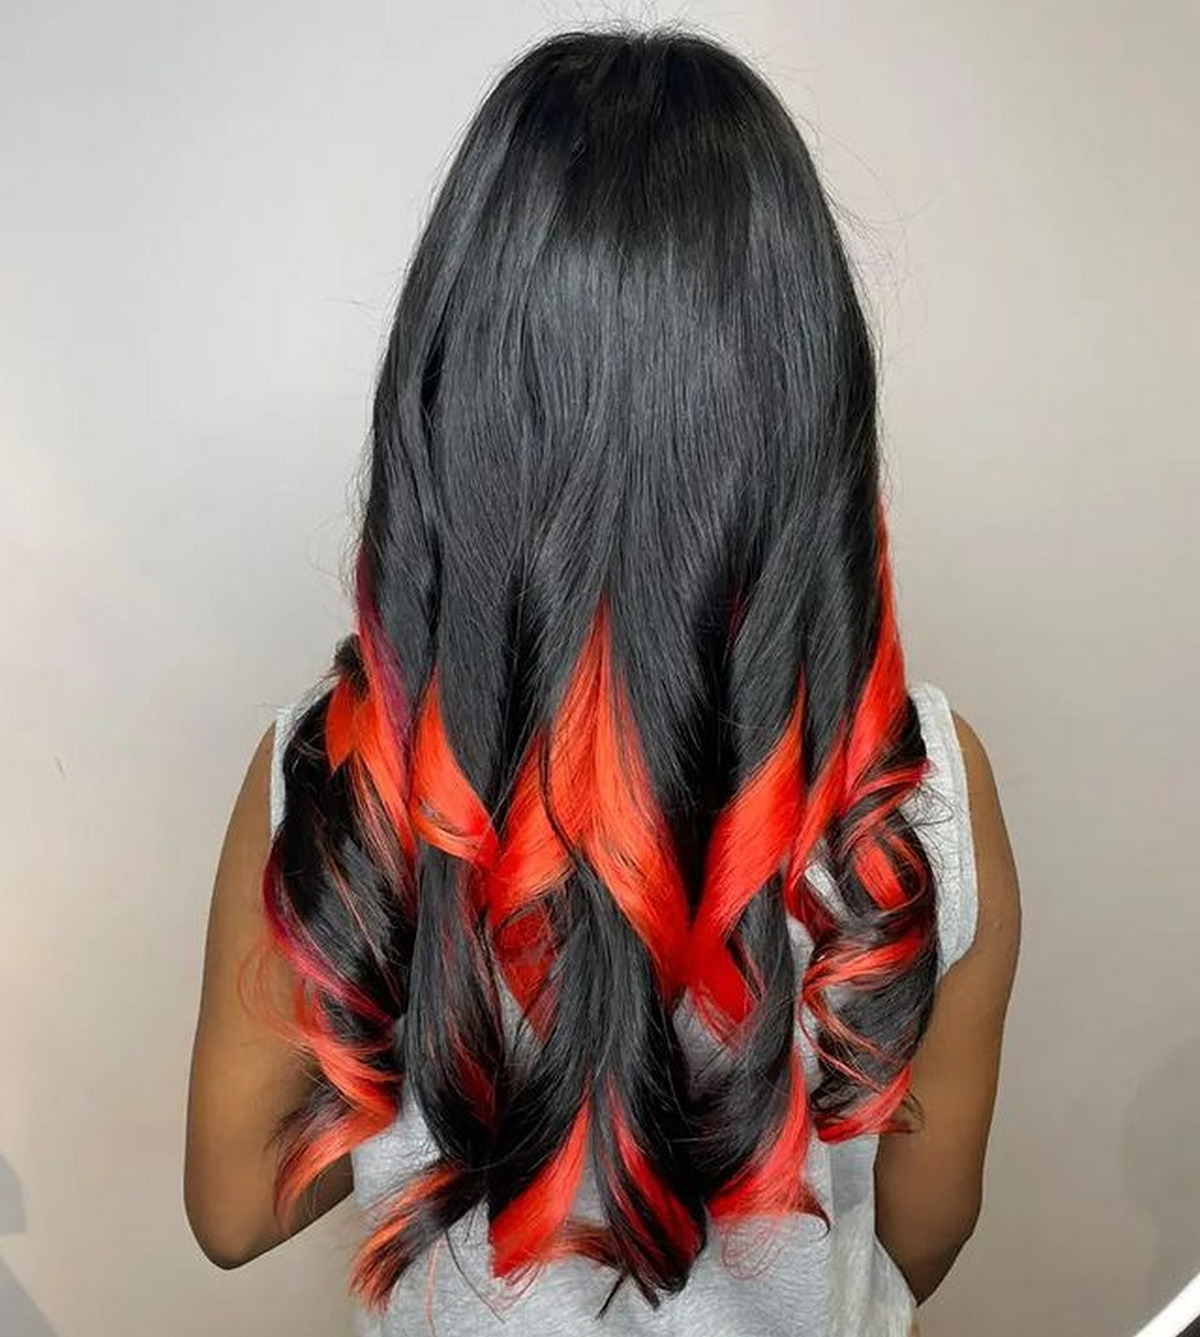 Long Body Waves With Scarlet Red Underneath